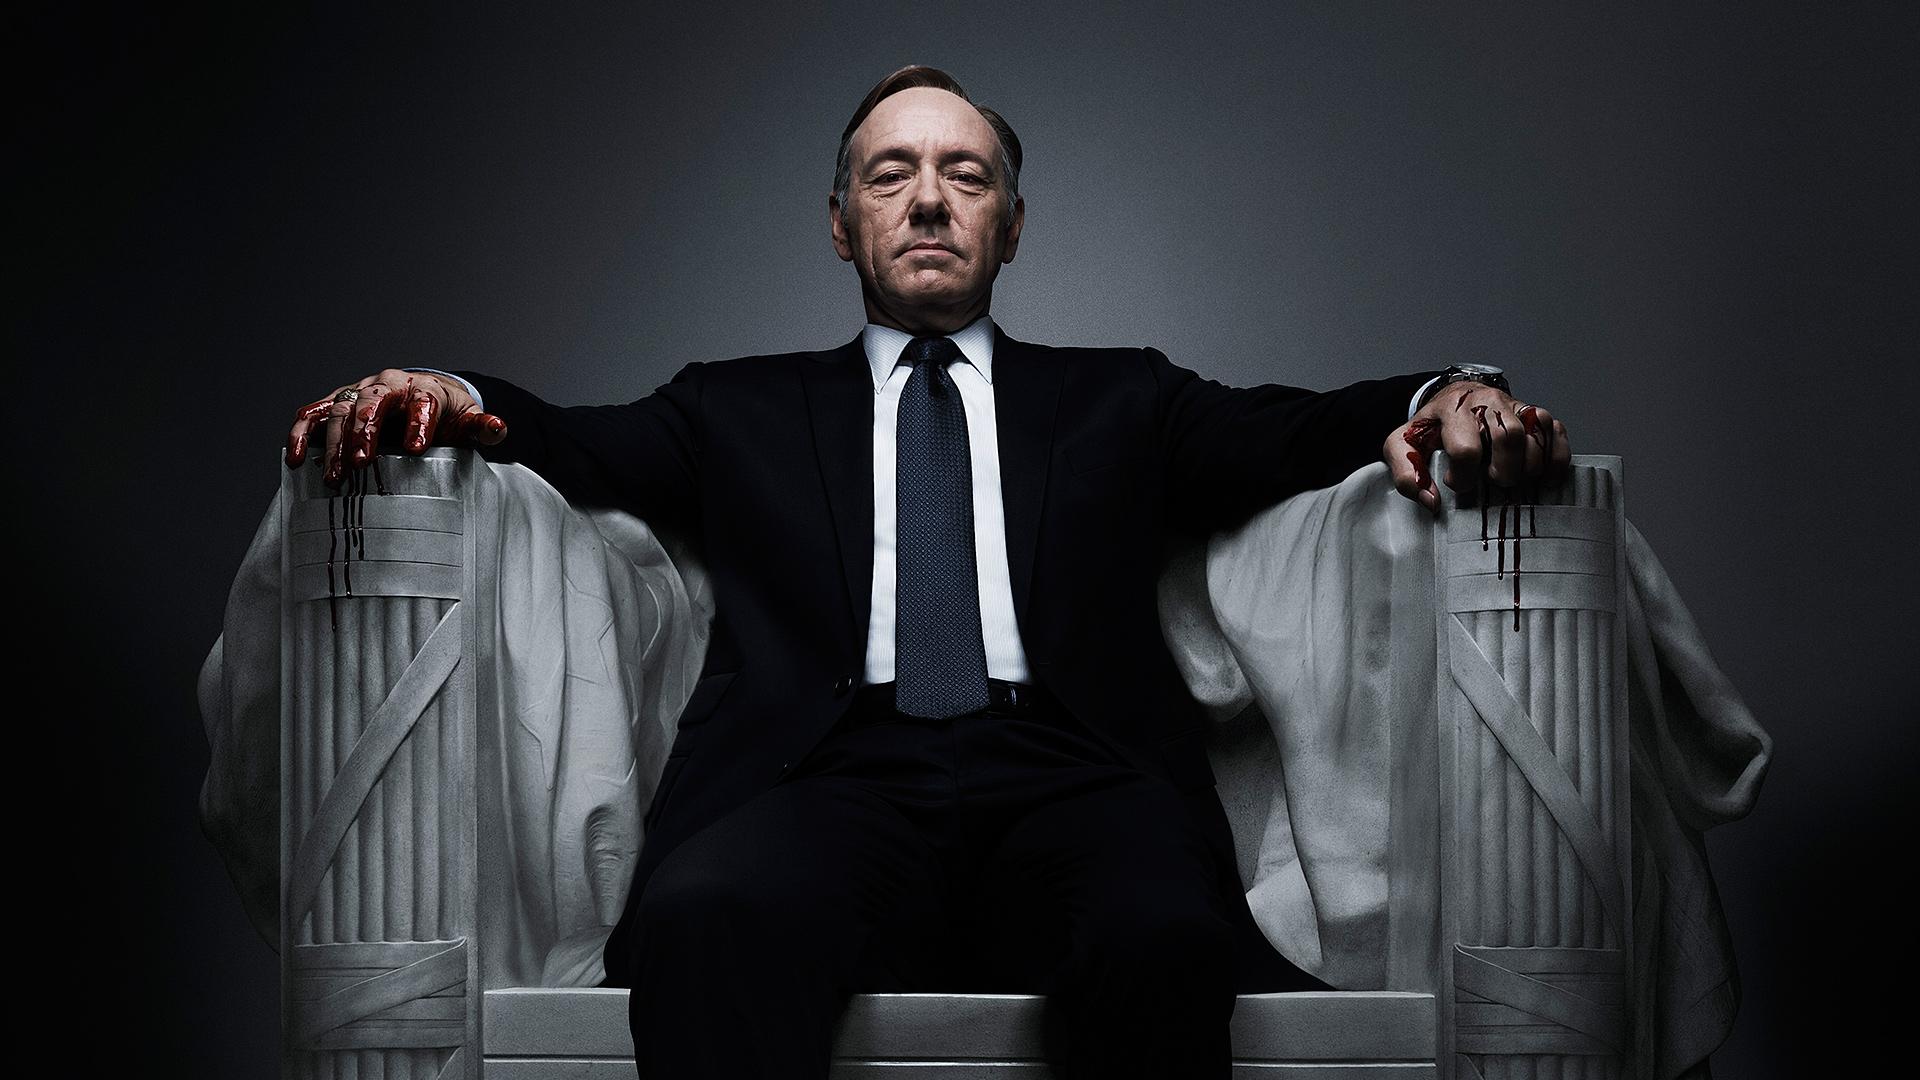 new house of cards season 4